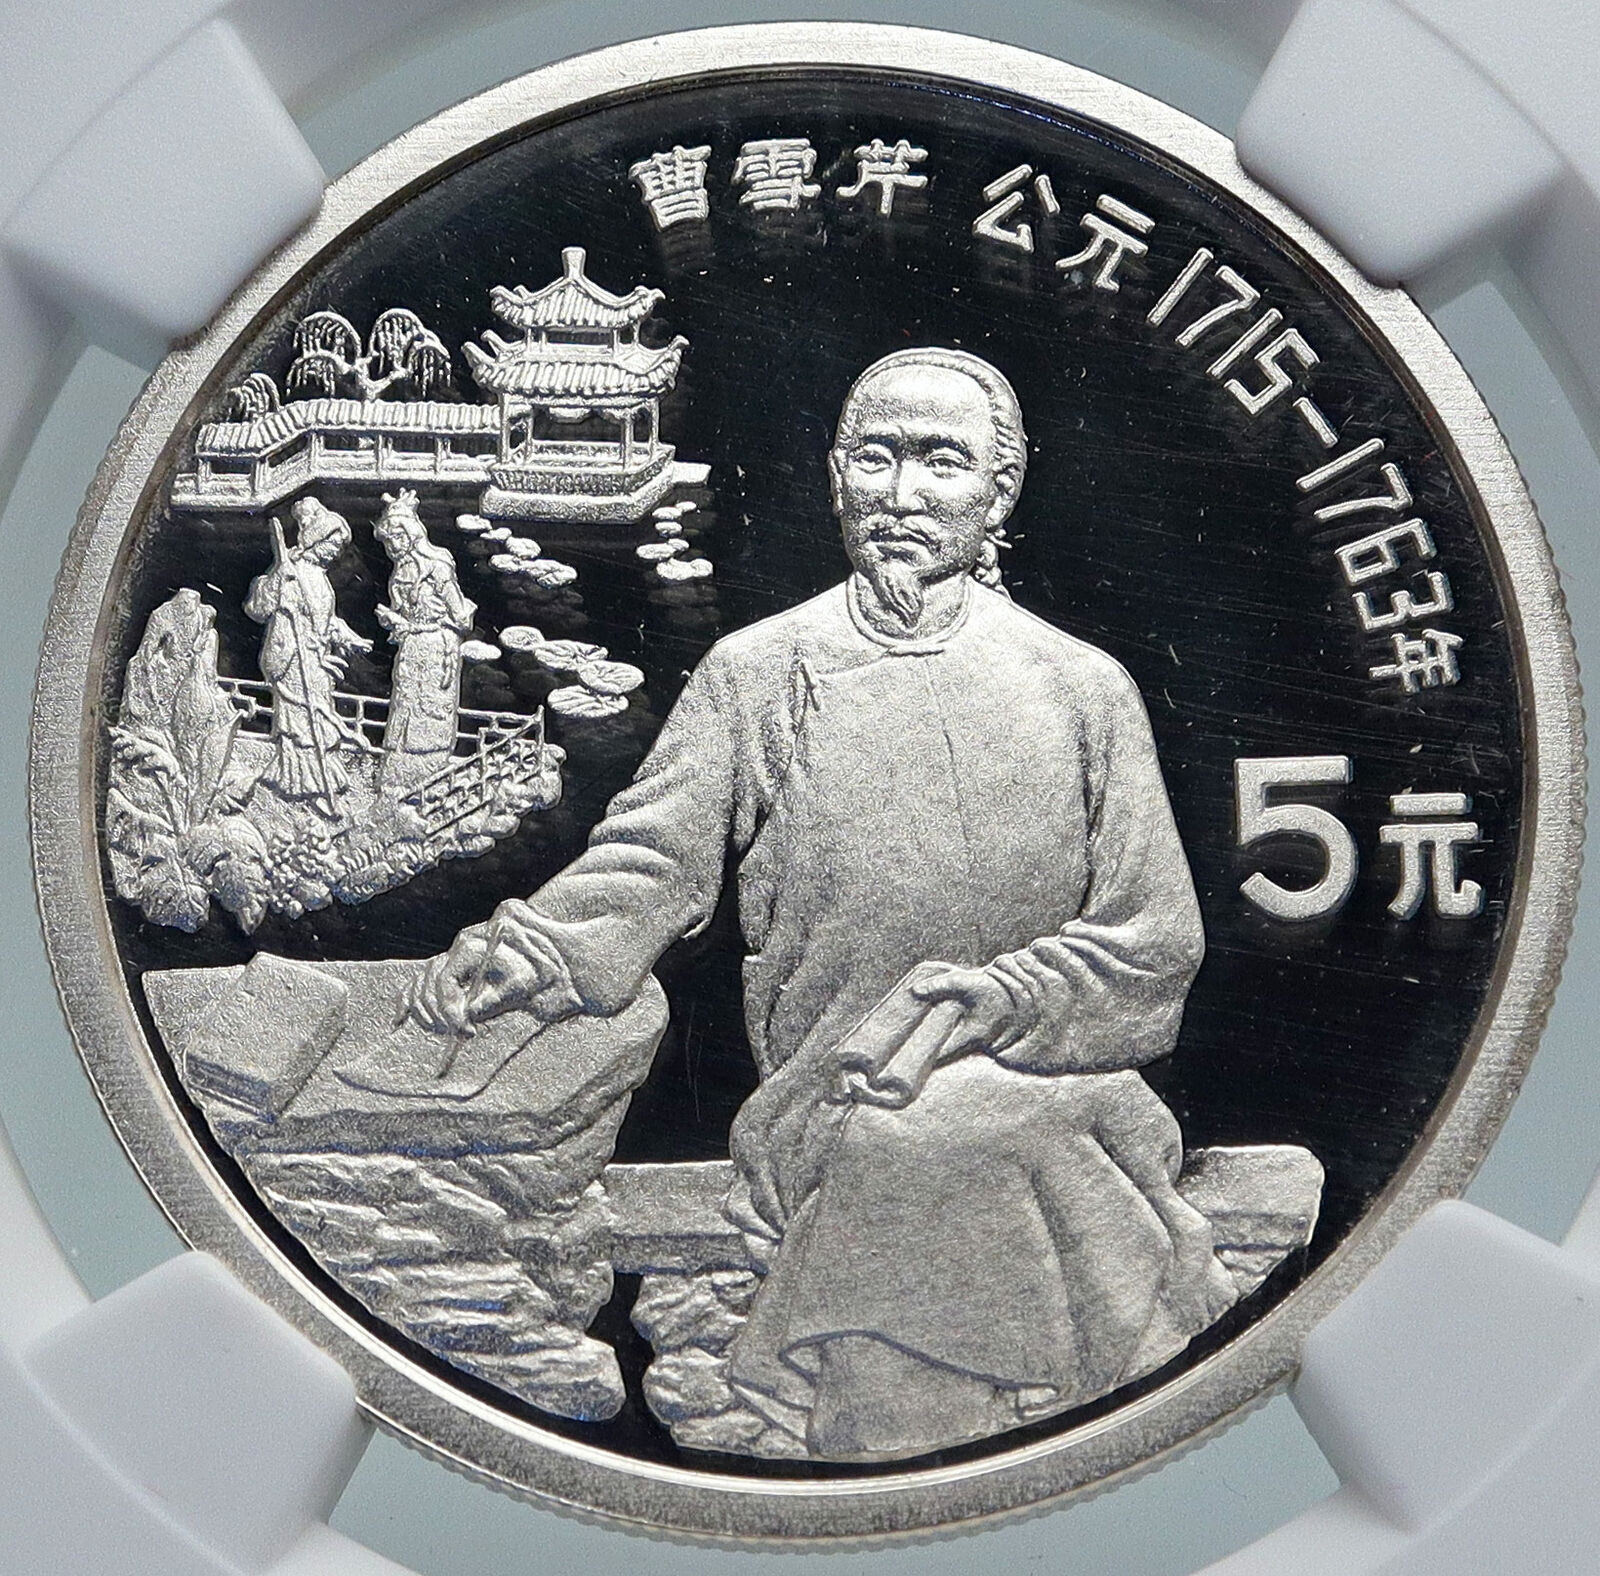 1991 CHINA Writer CAO XUEQIN Vintage Proof OLD Silver 5 Yuan Coin NGC i87113